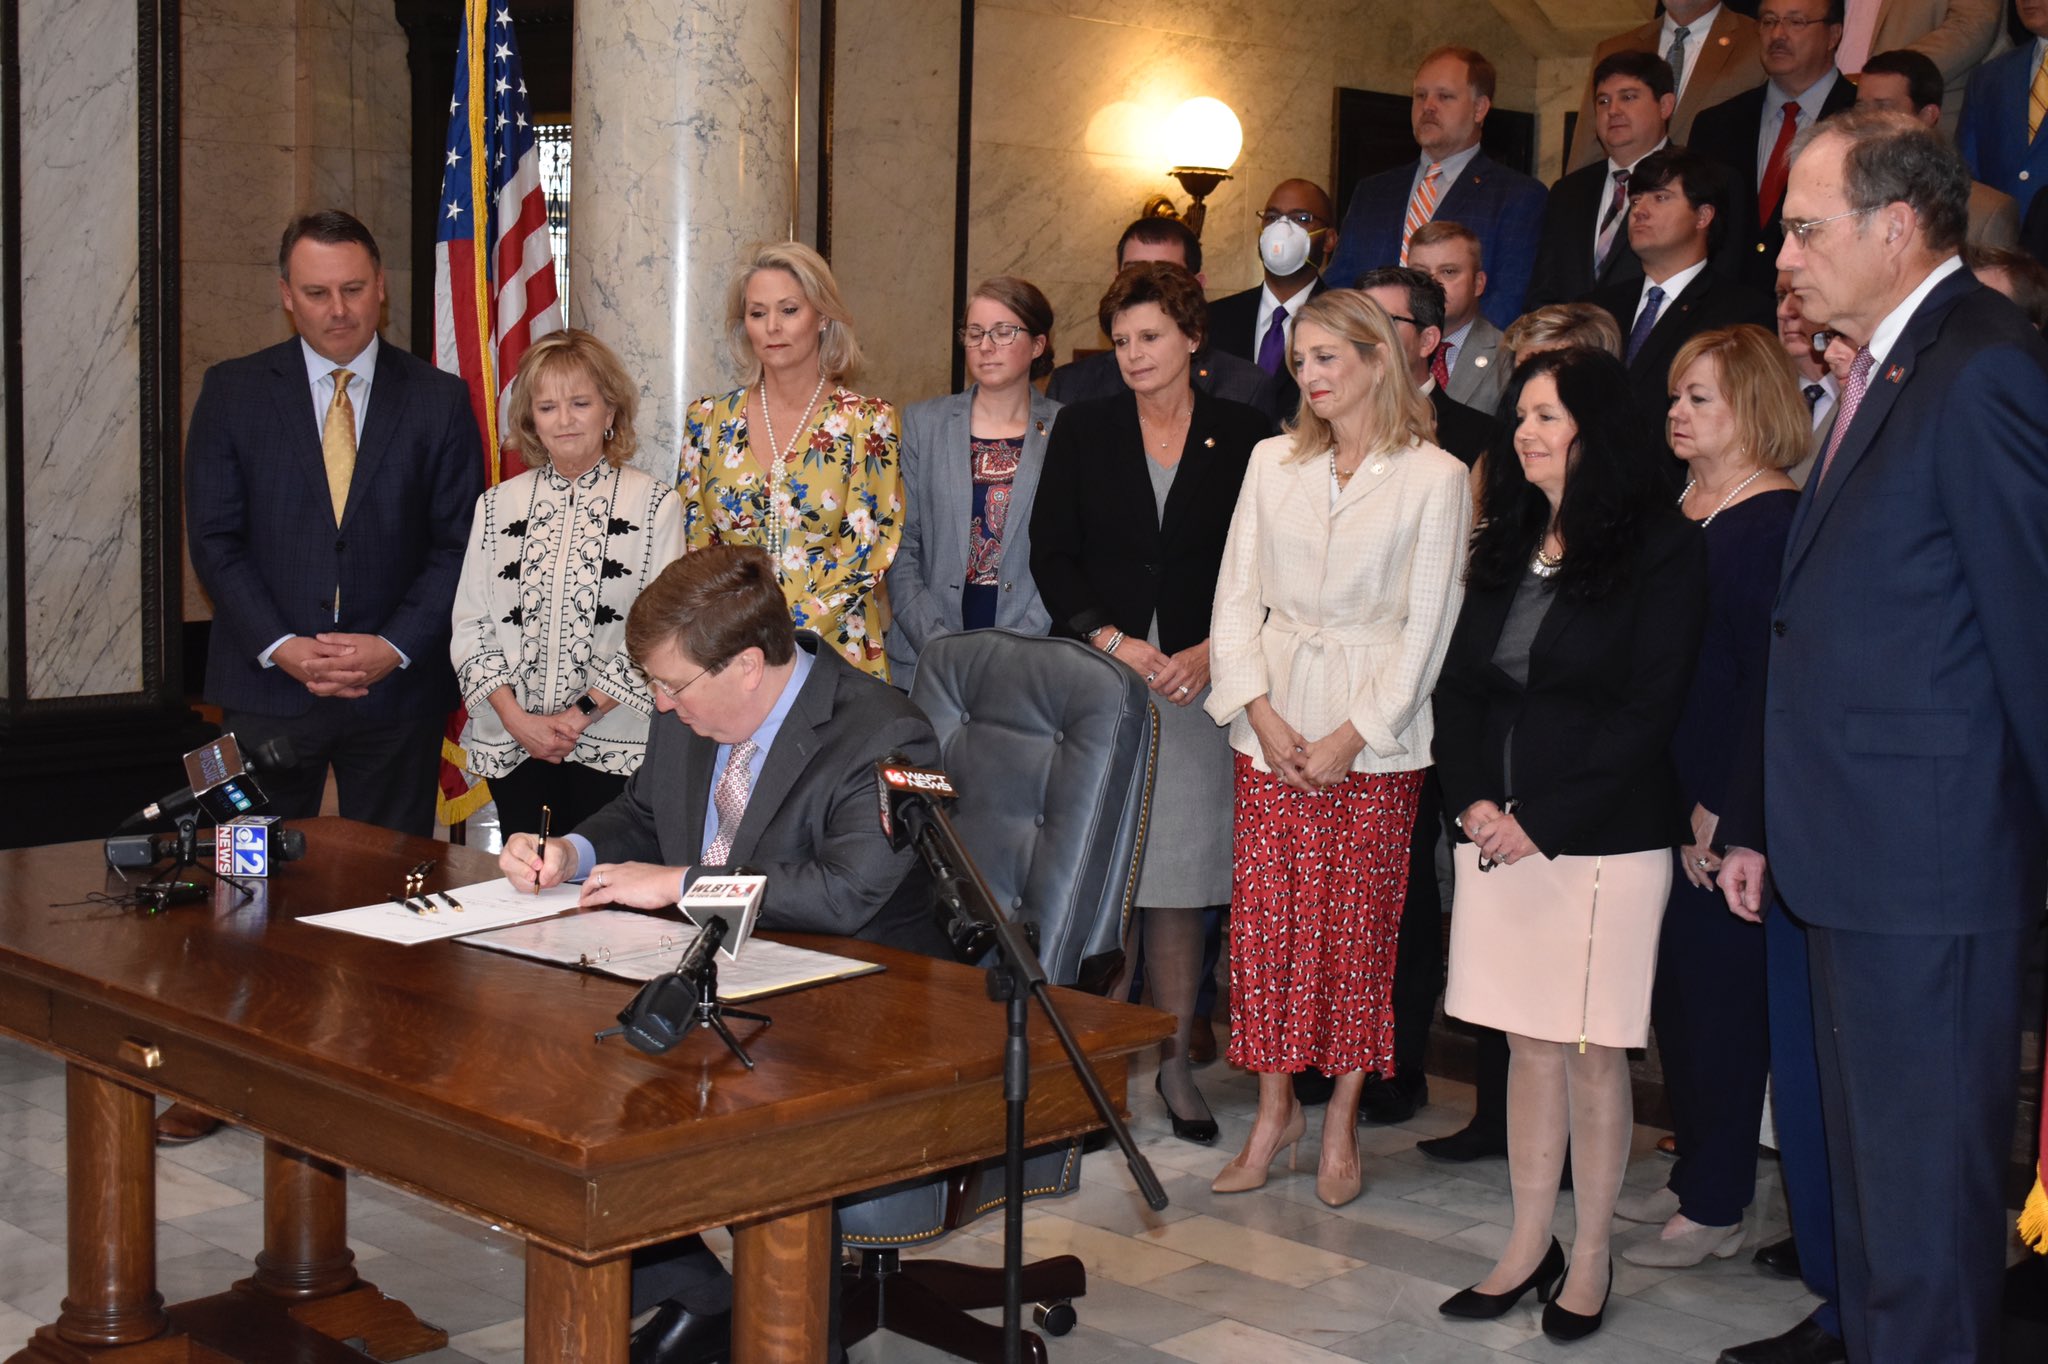 Governor Tate Reeves is seen sitting at a desk signing a ban on transgender athletes into law on March 11, 2021 with supporters of the legislation standing around him.